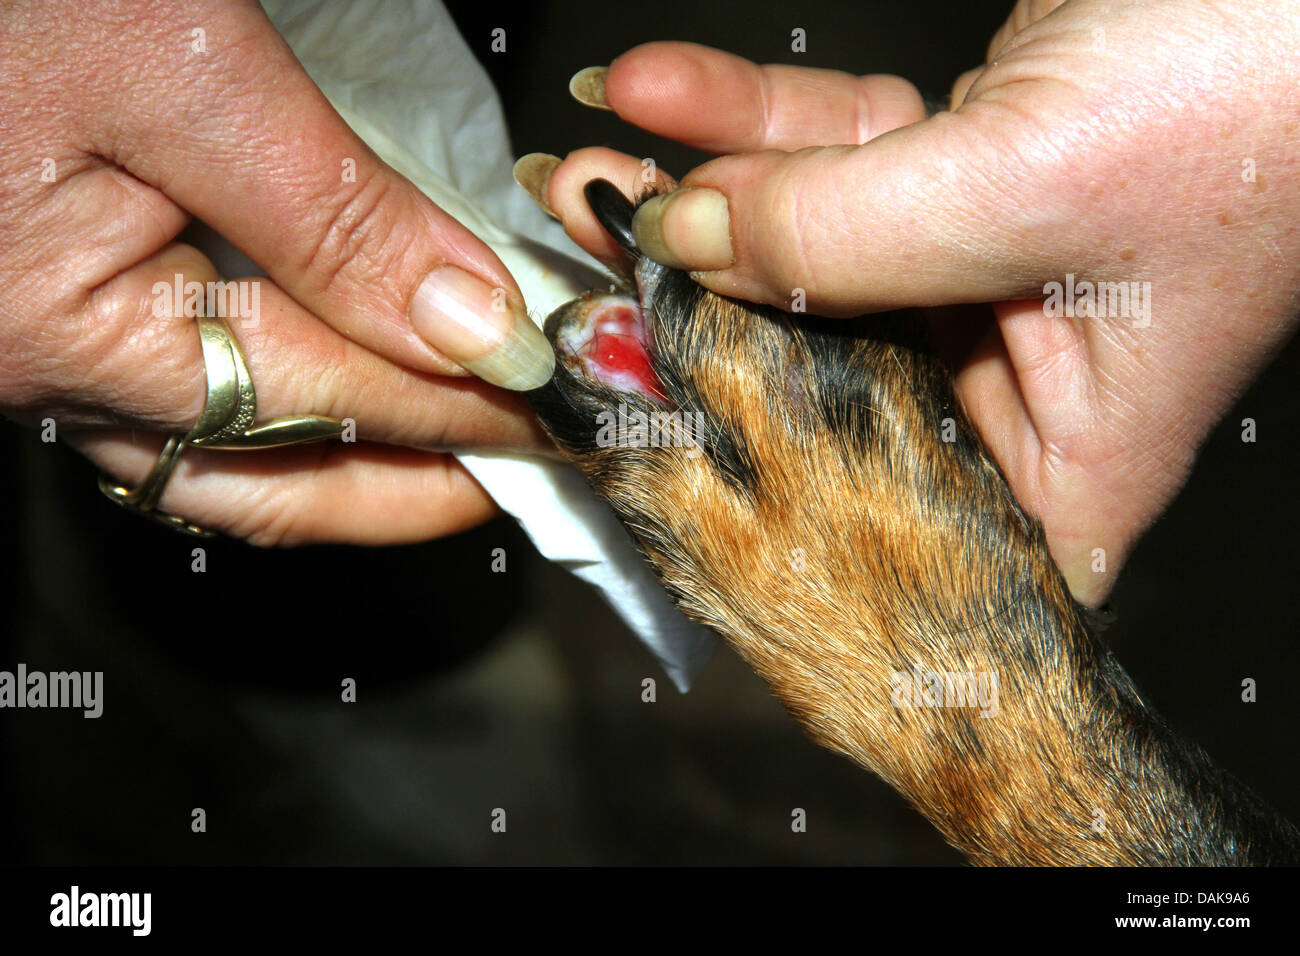 Nægte direktør Rekvisitter woman looking at the burn wound of dog�s paw Stock Photo - Alamy